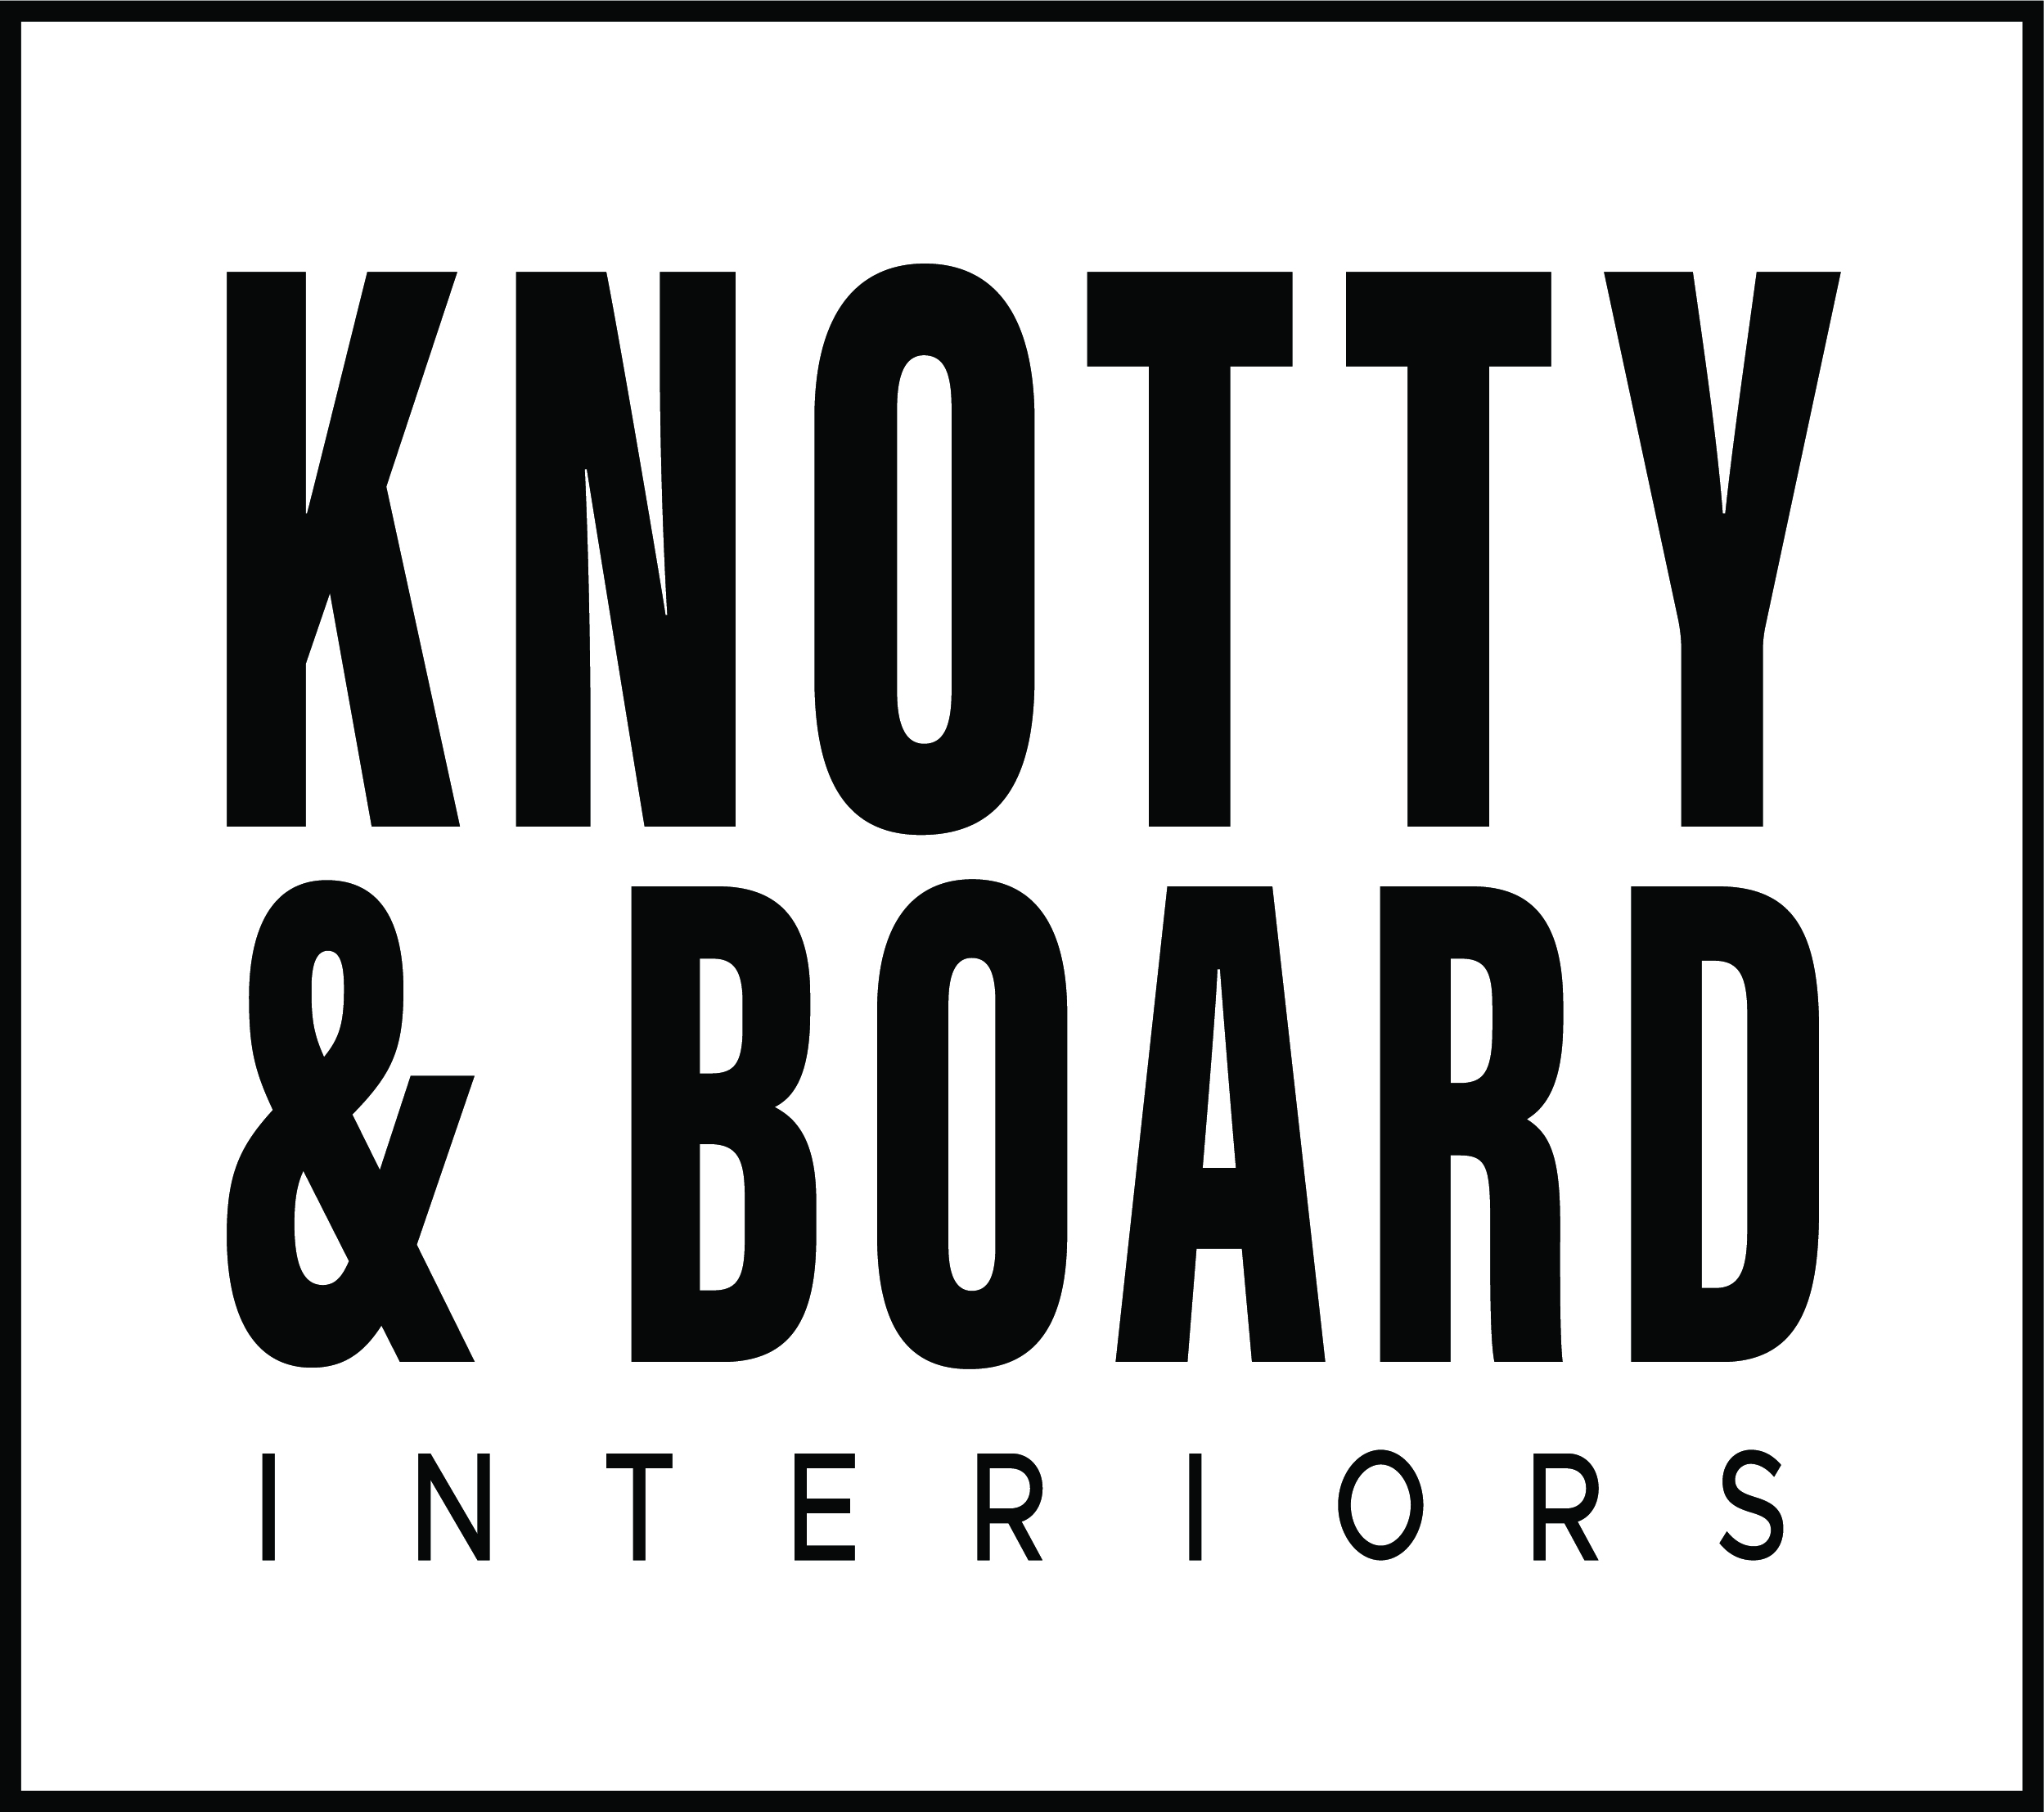 Knotty and Board Interiors furniture decor interior design services gifts bedding custom